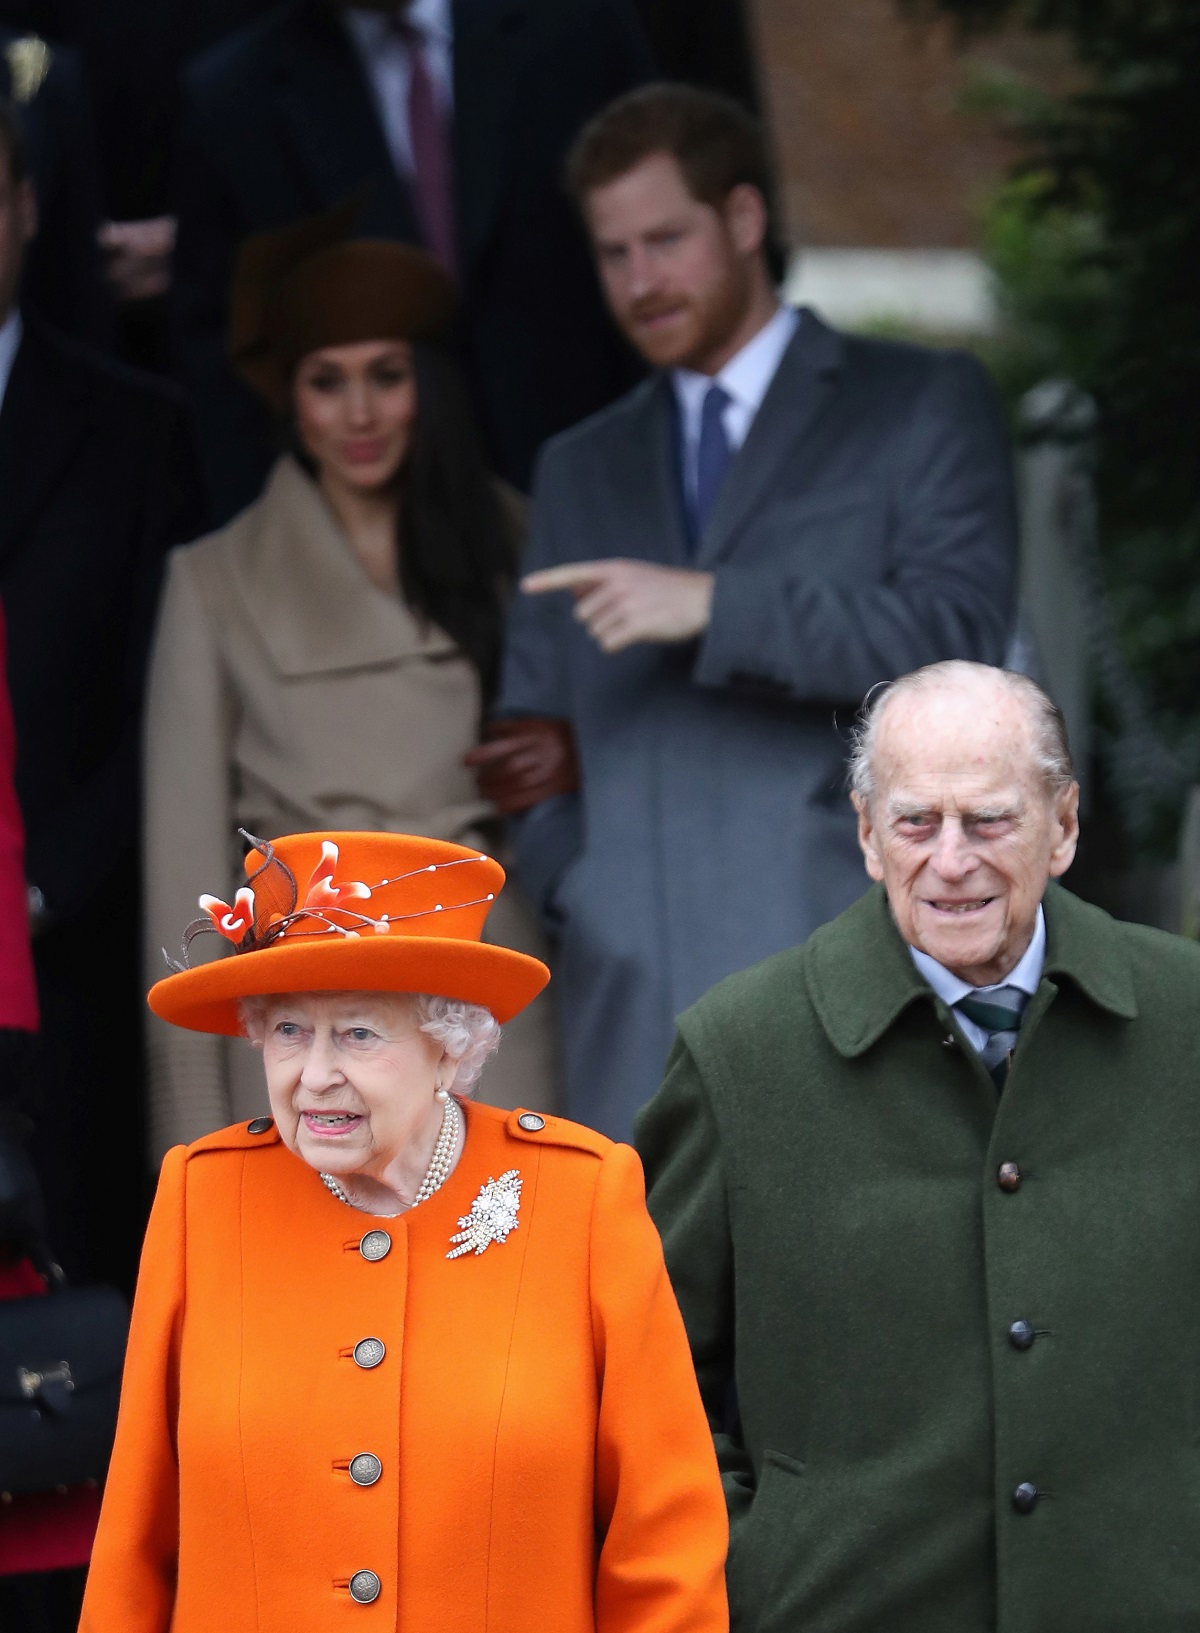 Queen Elizabeth and Prince Philip Were ‘Disappointed’ Over Prince Harry and Meghan’s Holiday Snub, Royal Expert Says